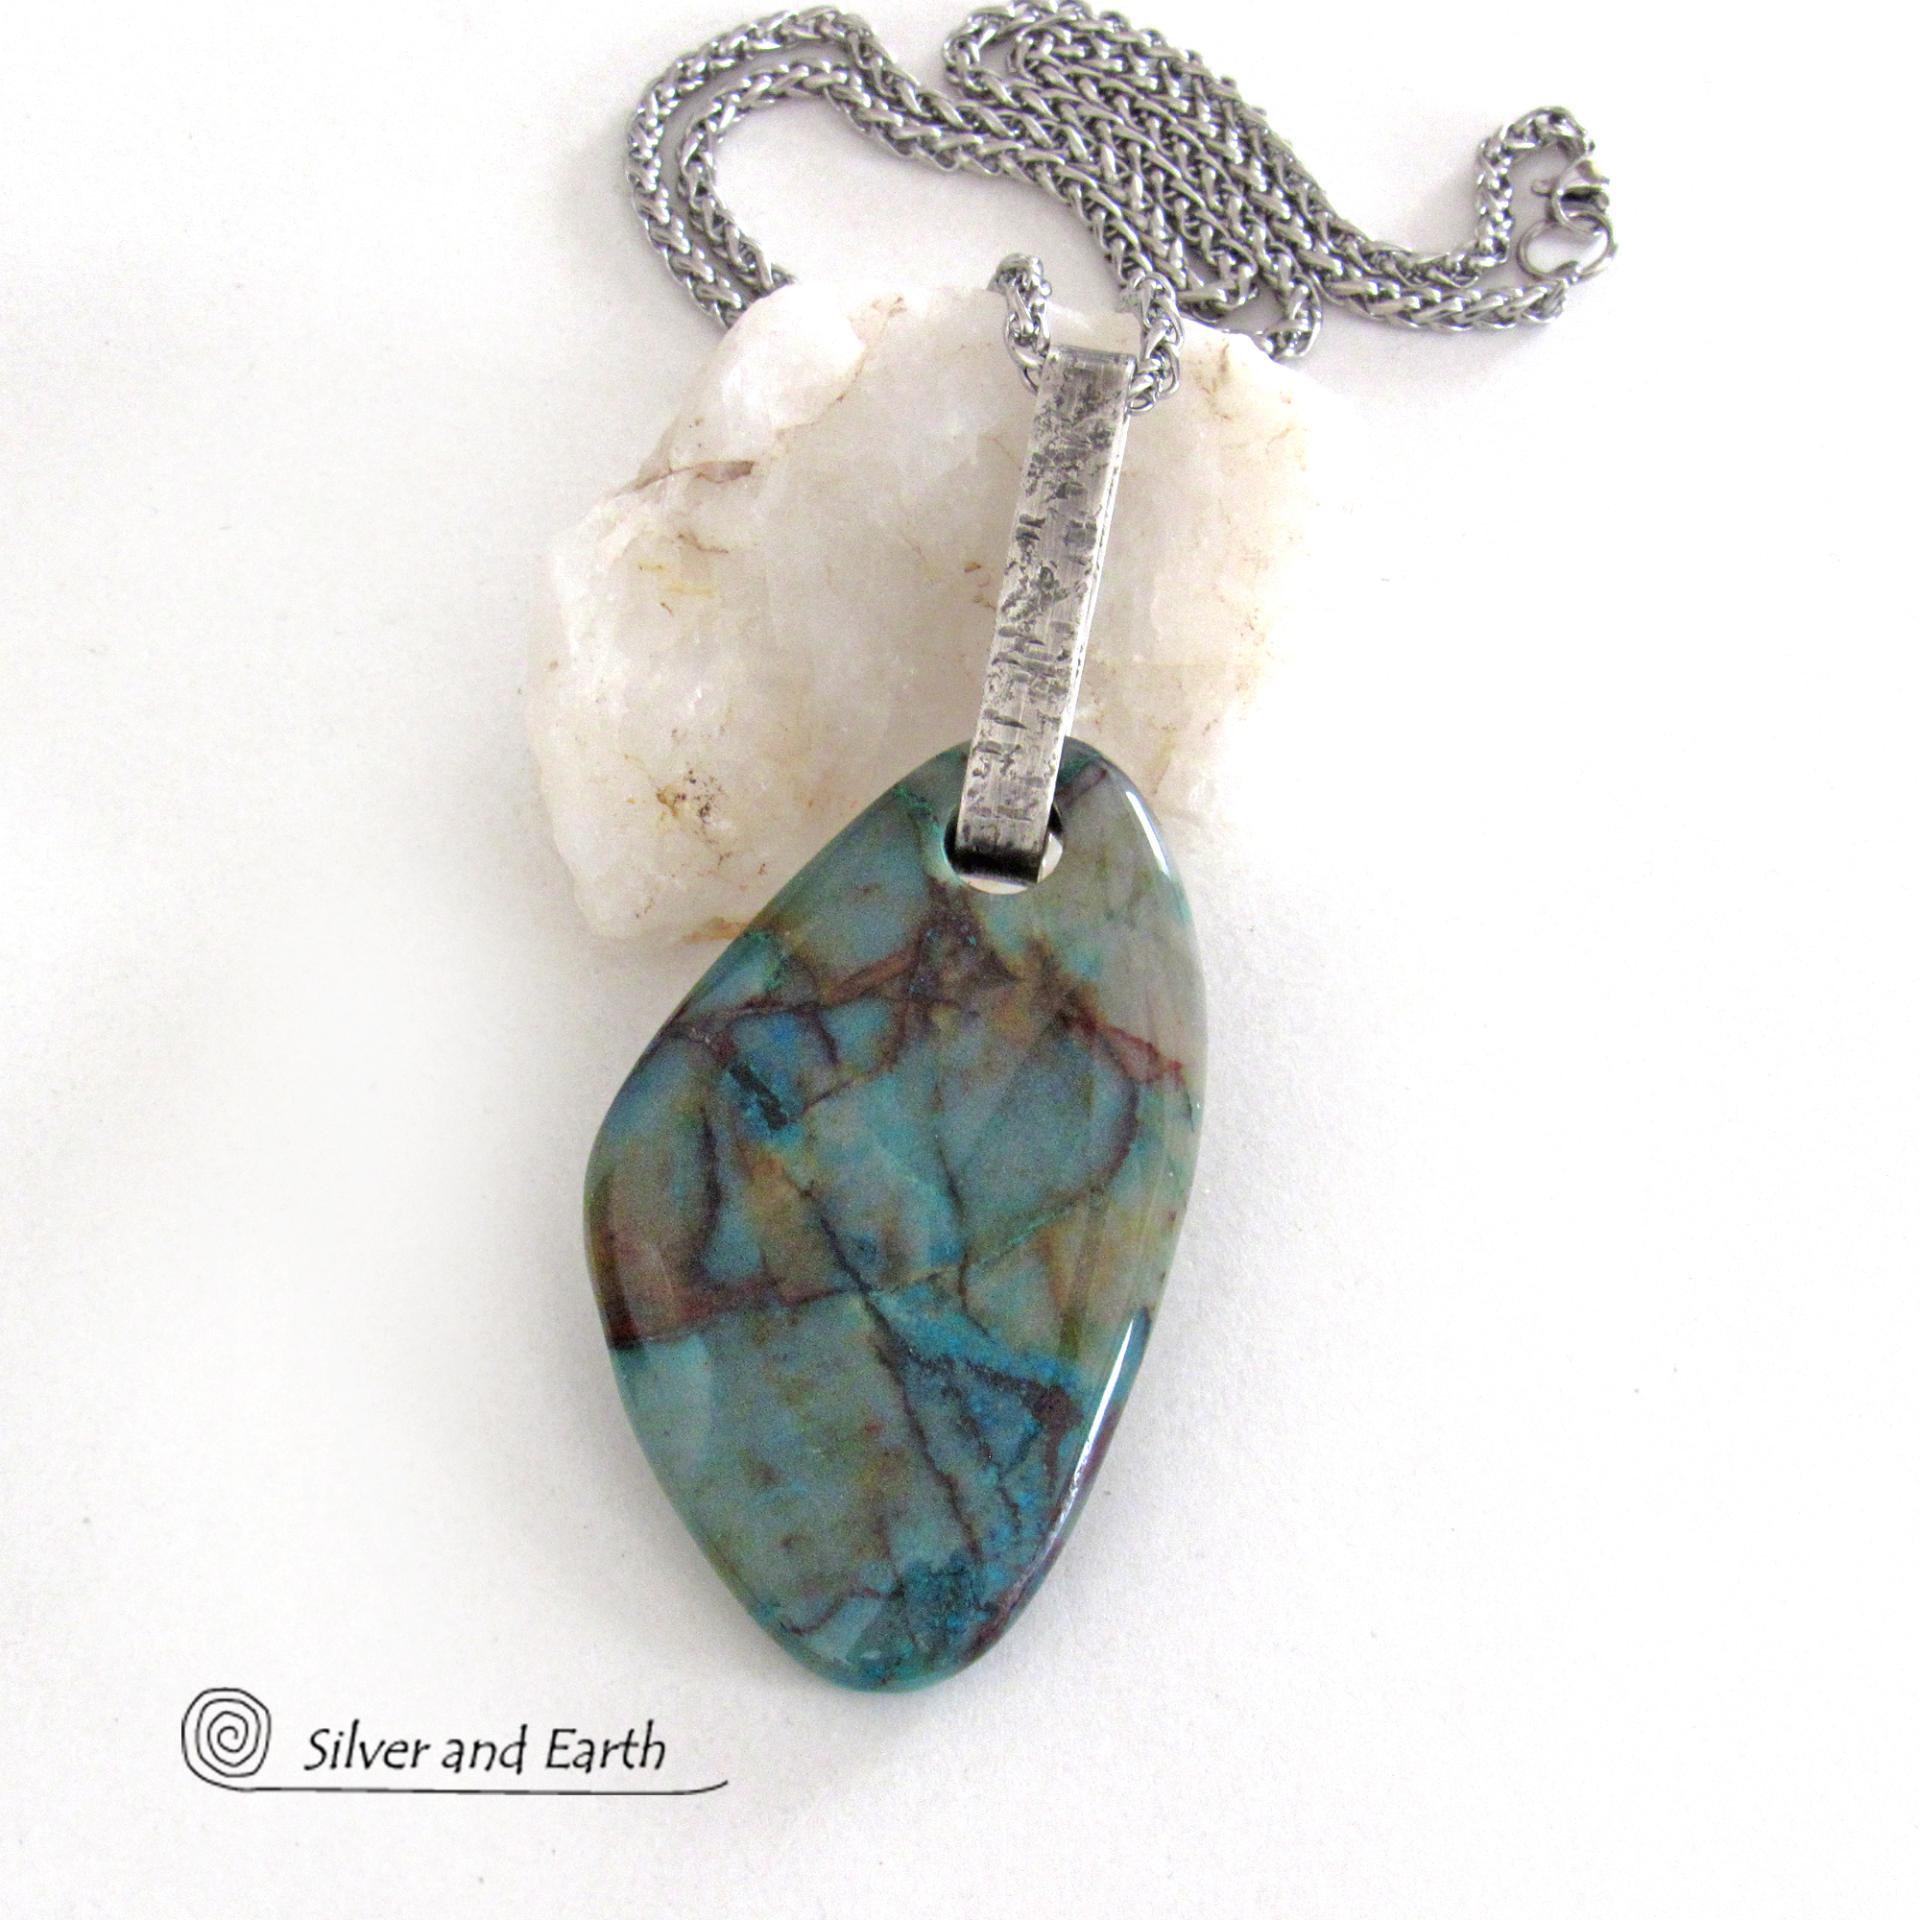 Large Blue Chrysocolla Quartz Gemstone Sterling Silver Necklace - One of a Kind Unique Natural Stone Jewelry 